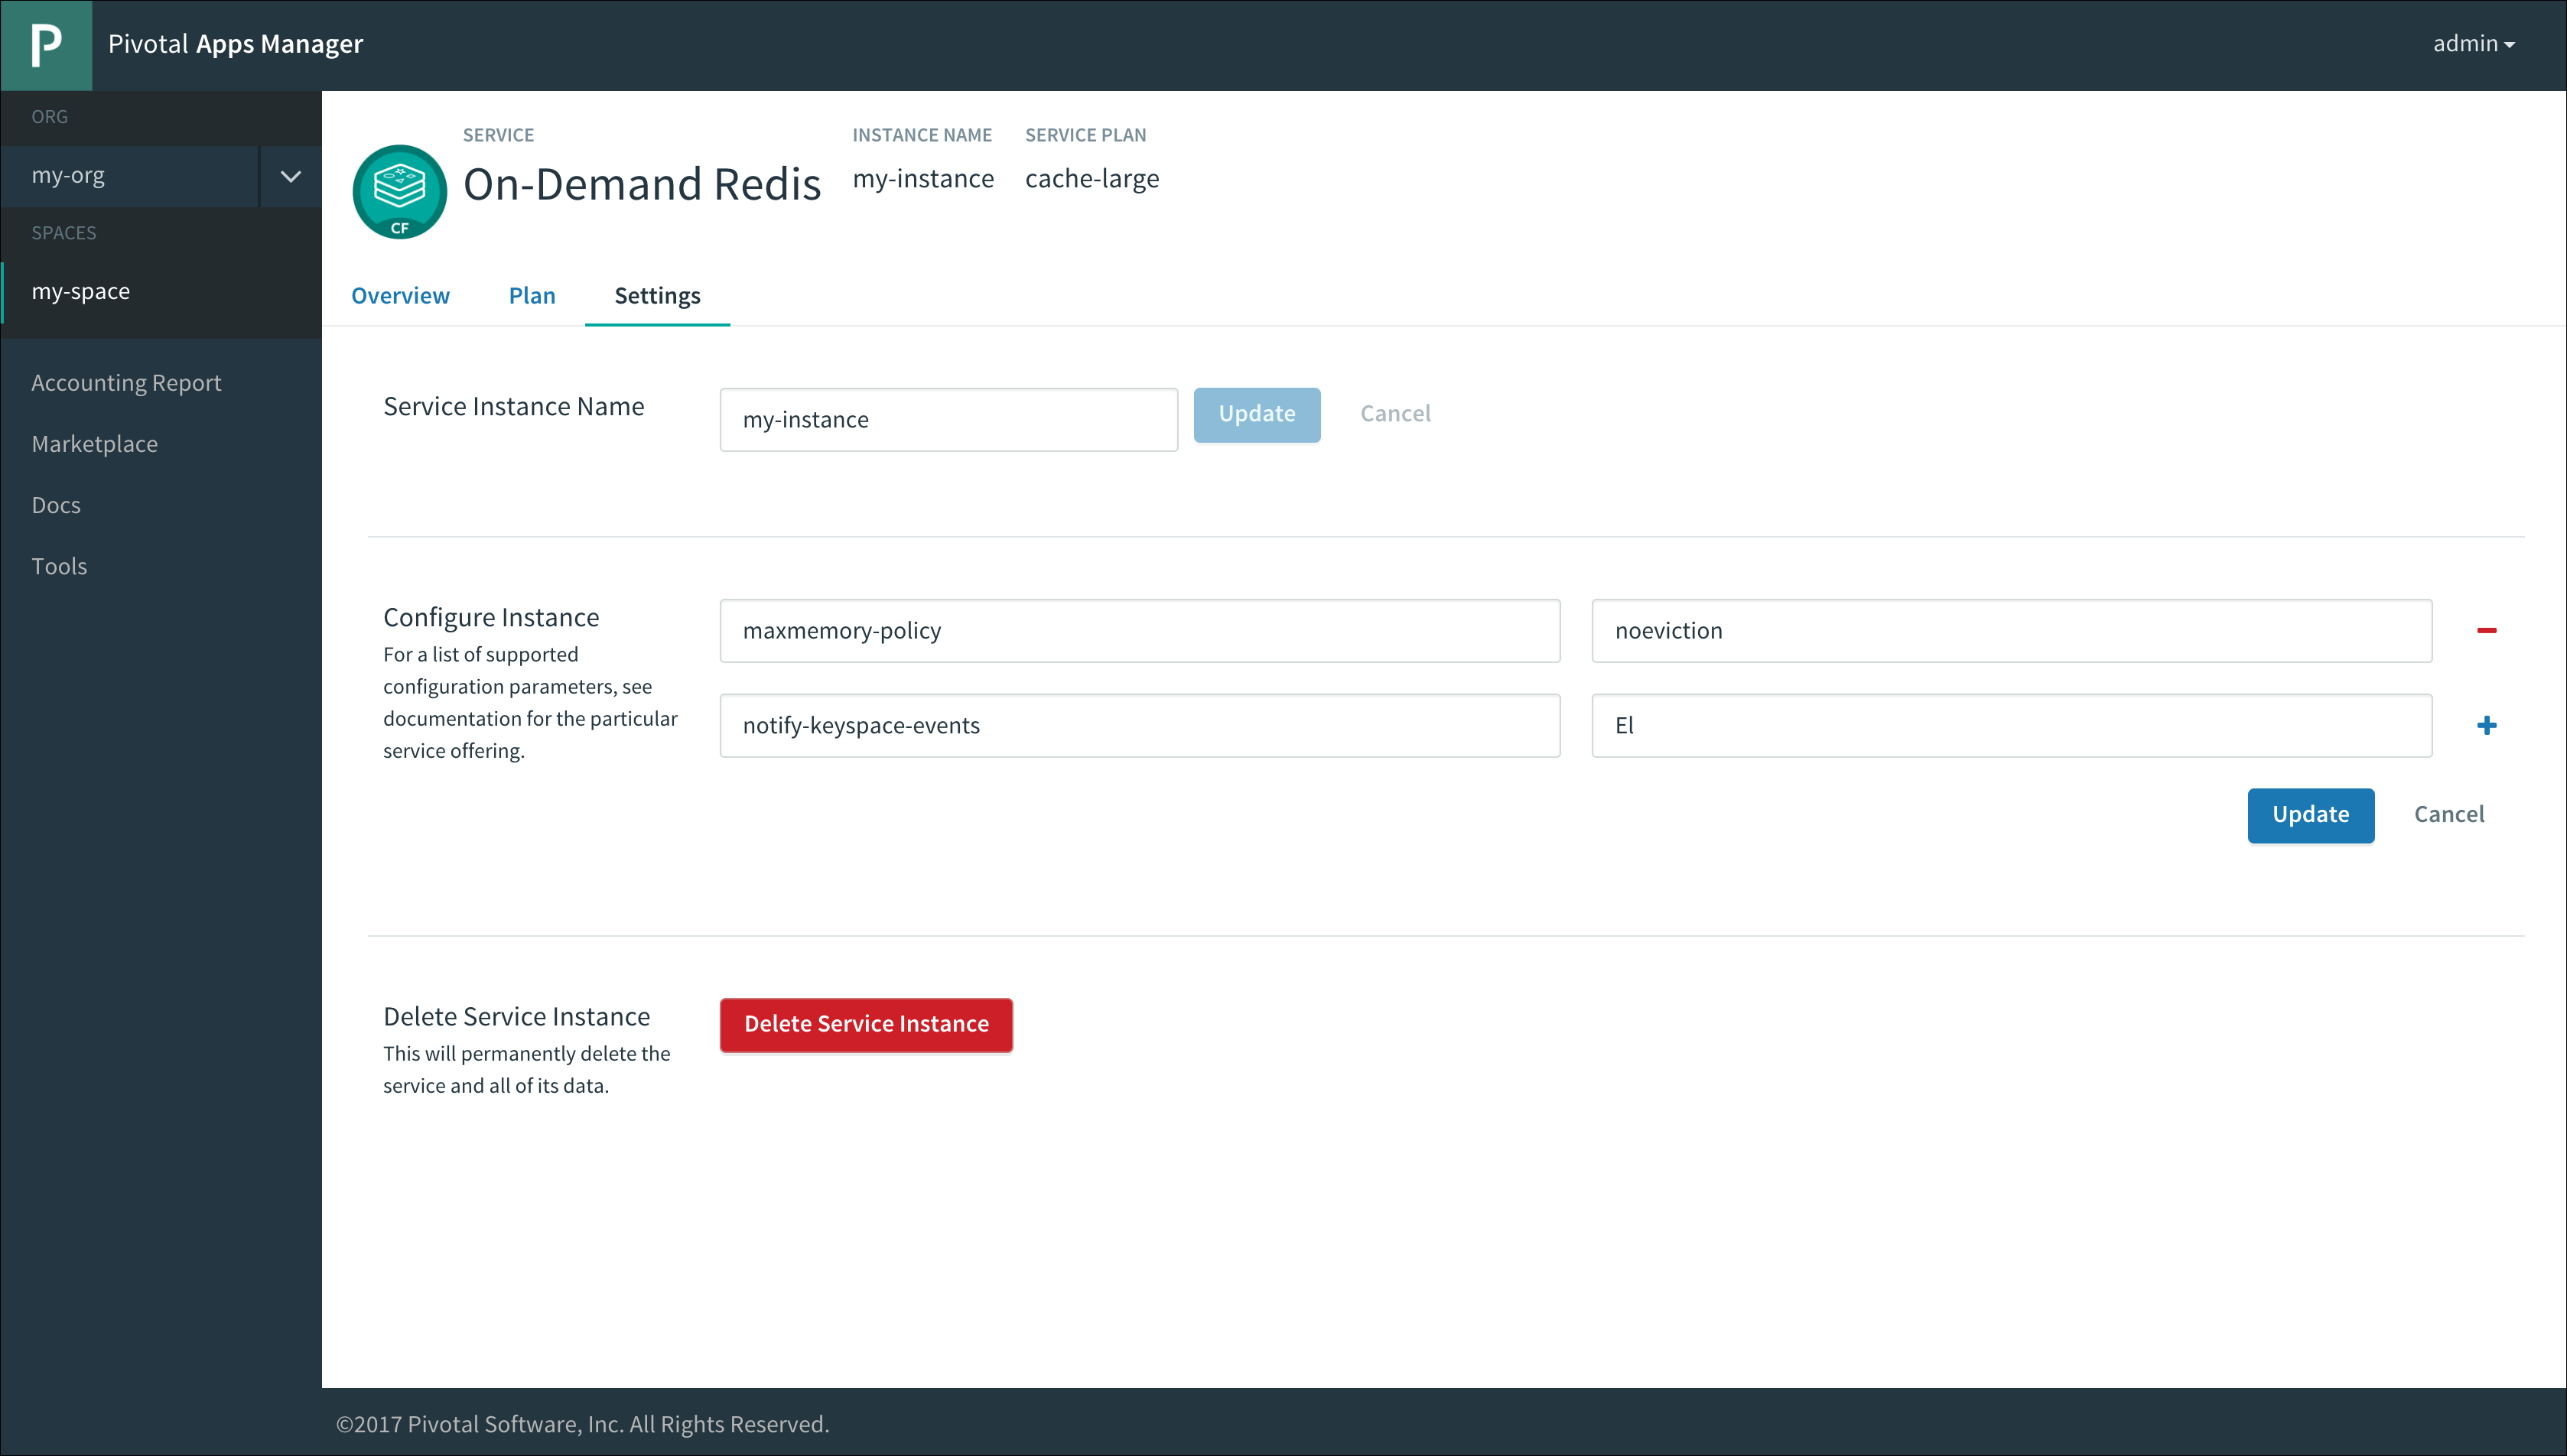 Screenshot of an example on-demand Redis service instance pane in Apps Manager.
At the top of the pane there are tabs labeled Overview, Plan, and Settings.
The Settings tab is selected. There is a Service Instance Name field with the
buttons Update and Cancel next to it.
Below this, there are pairs of Configure Instance fields for adding the name
and value of parameters.
To the right of the Configure Instance fields there are plus and minus buttons
for adding and removing pairs of parameter fields.
There are Update and Cancel buttons below the Configure Instance fields.
At the bottom of the pane there is a Delete Service Instance button.